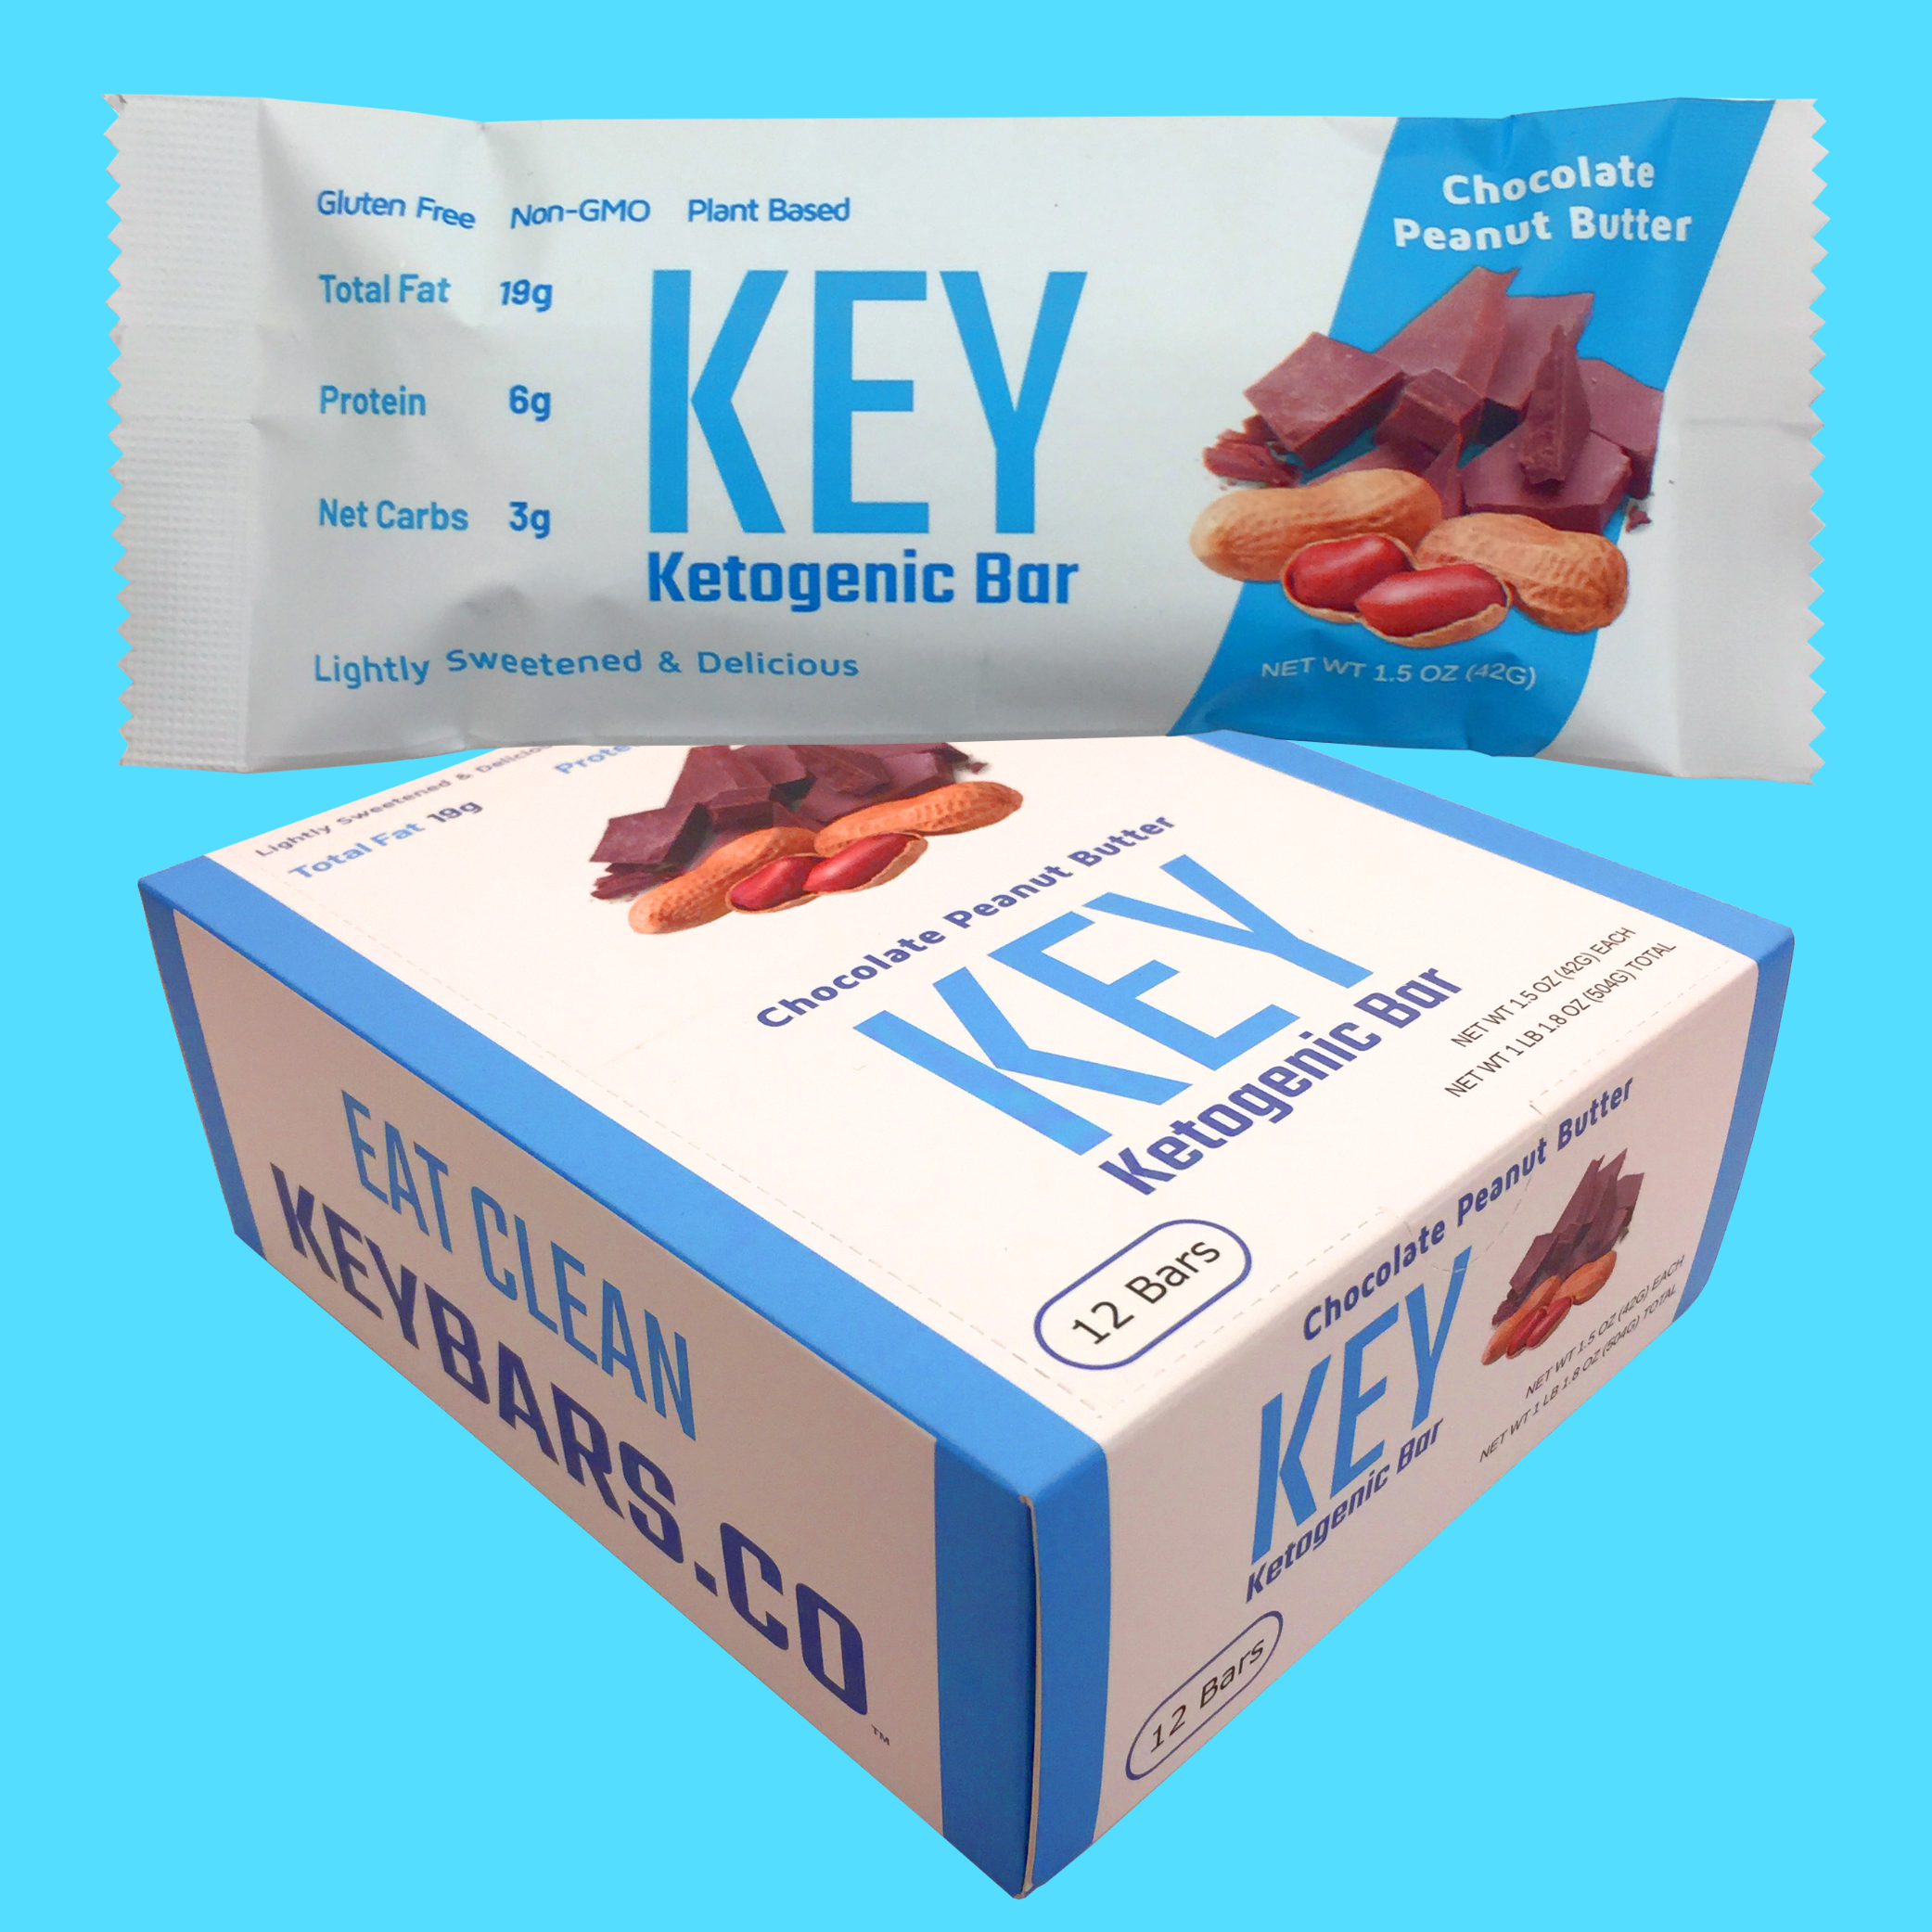 Chocolate Peanut Butter - 12 Count Box - KeyBars